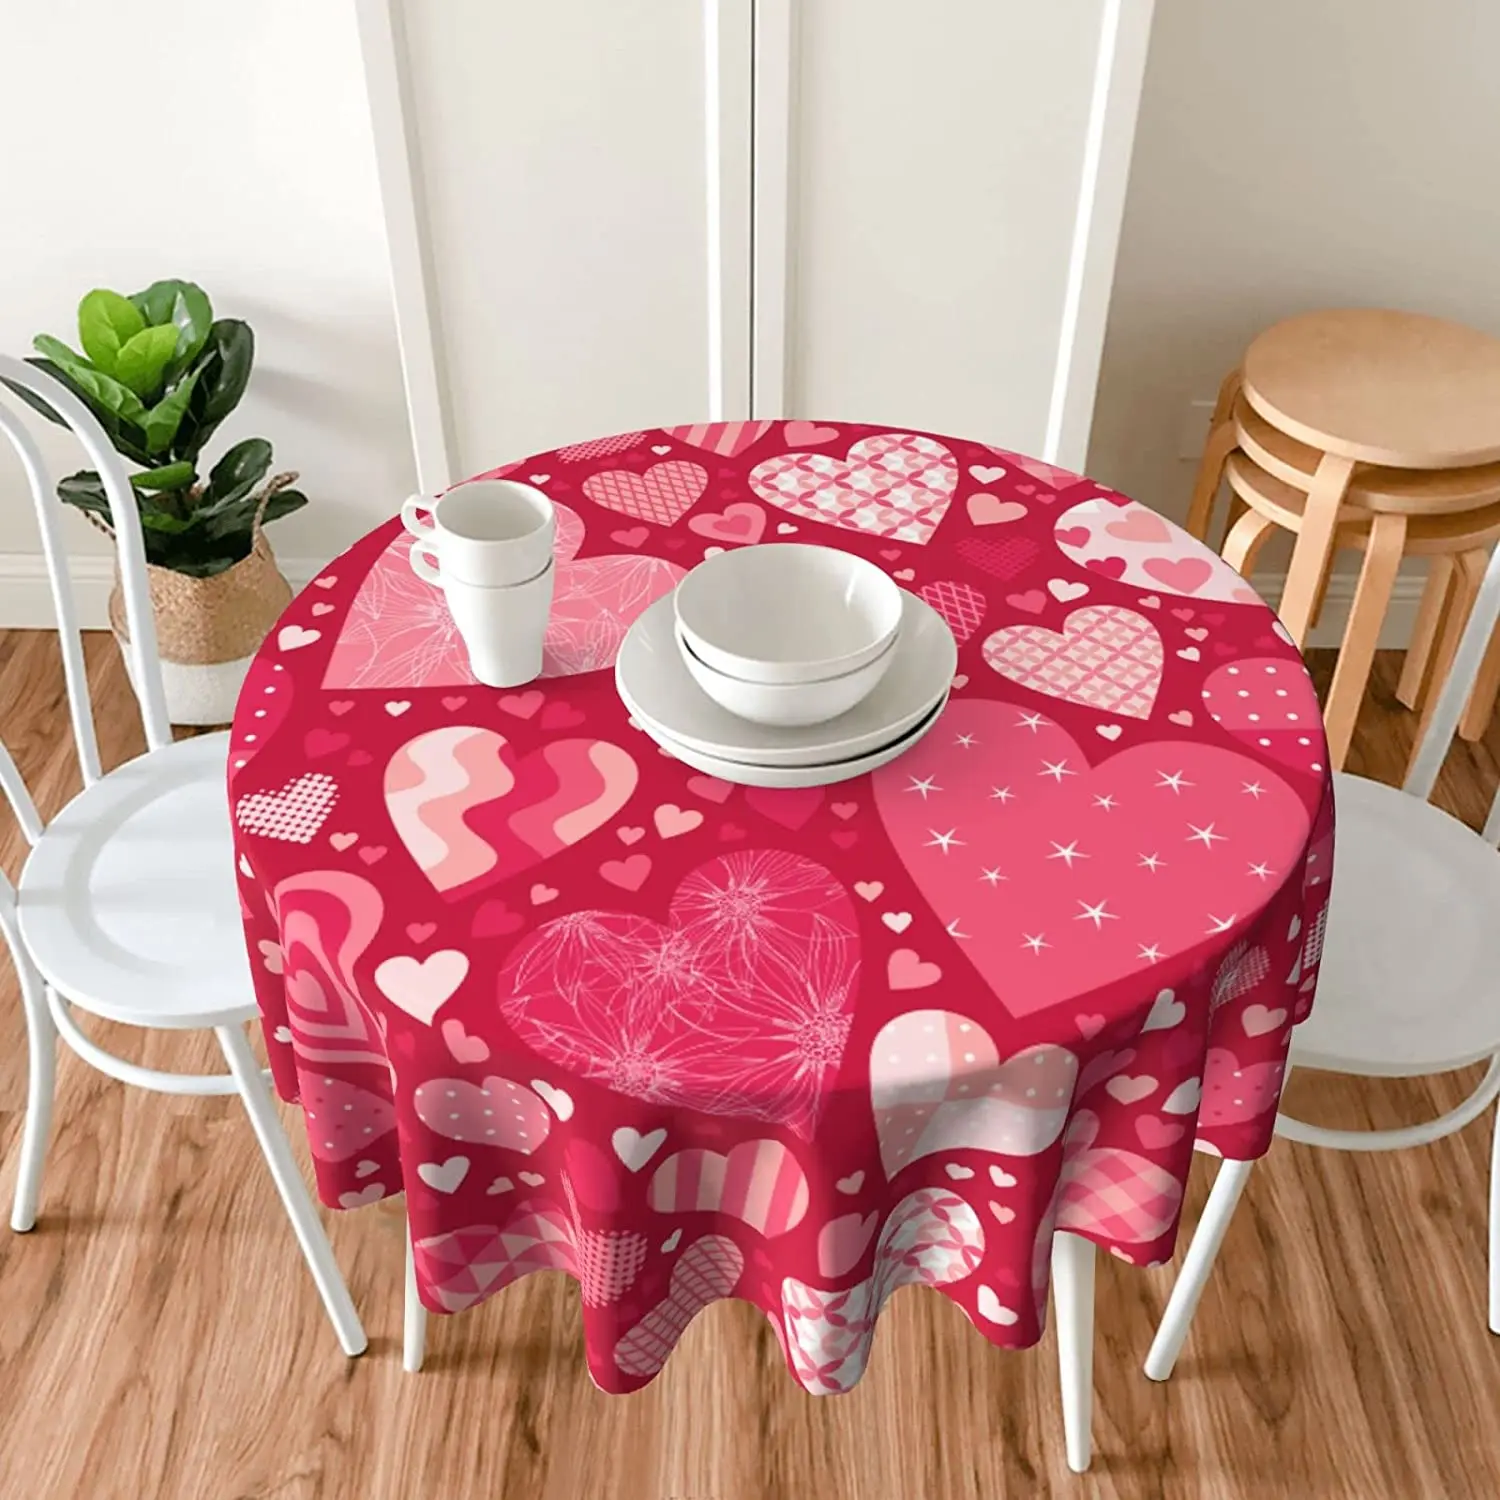 Happy Valentine's Day Tablecloth Round 60 Inch Ruitic Pink Red Love Heart Table Cloth Waterproof for Home Party Wedding Picnic